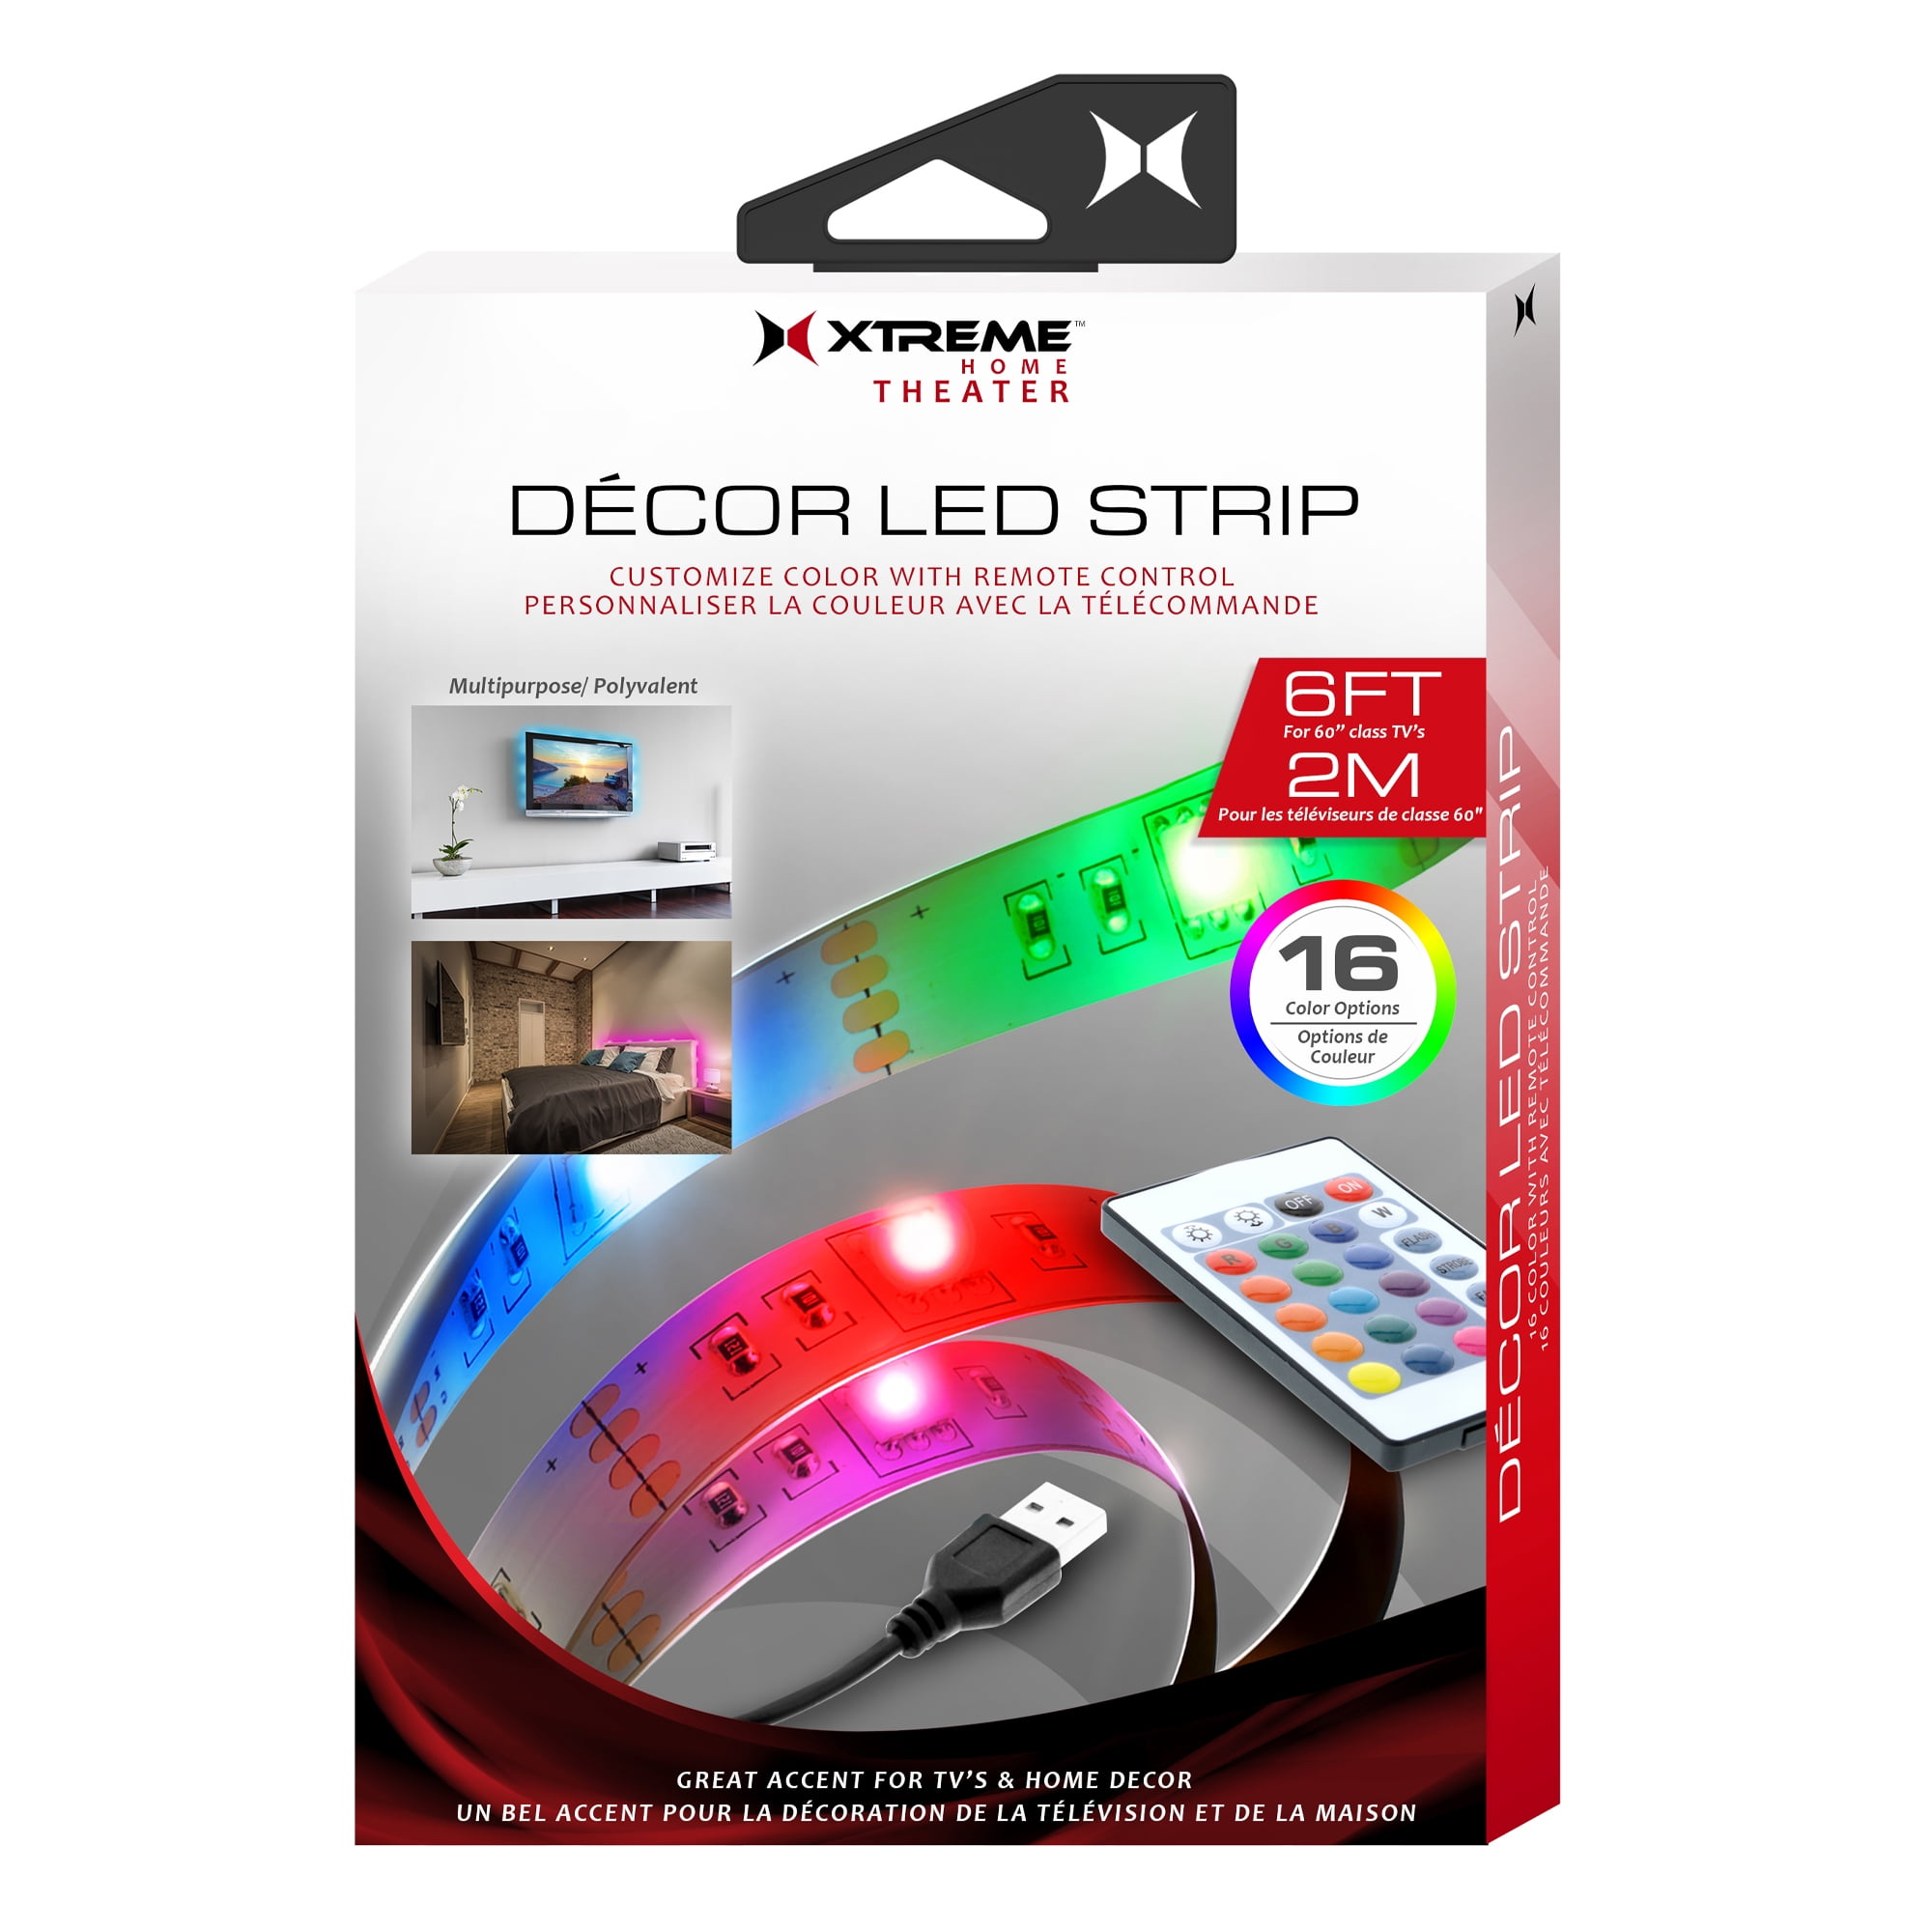 LAX USB LED Light Strip with Remote, RGB DIY Colors TV LED for Gaming